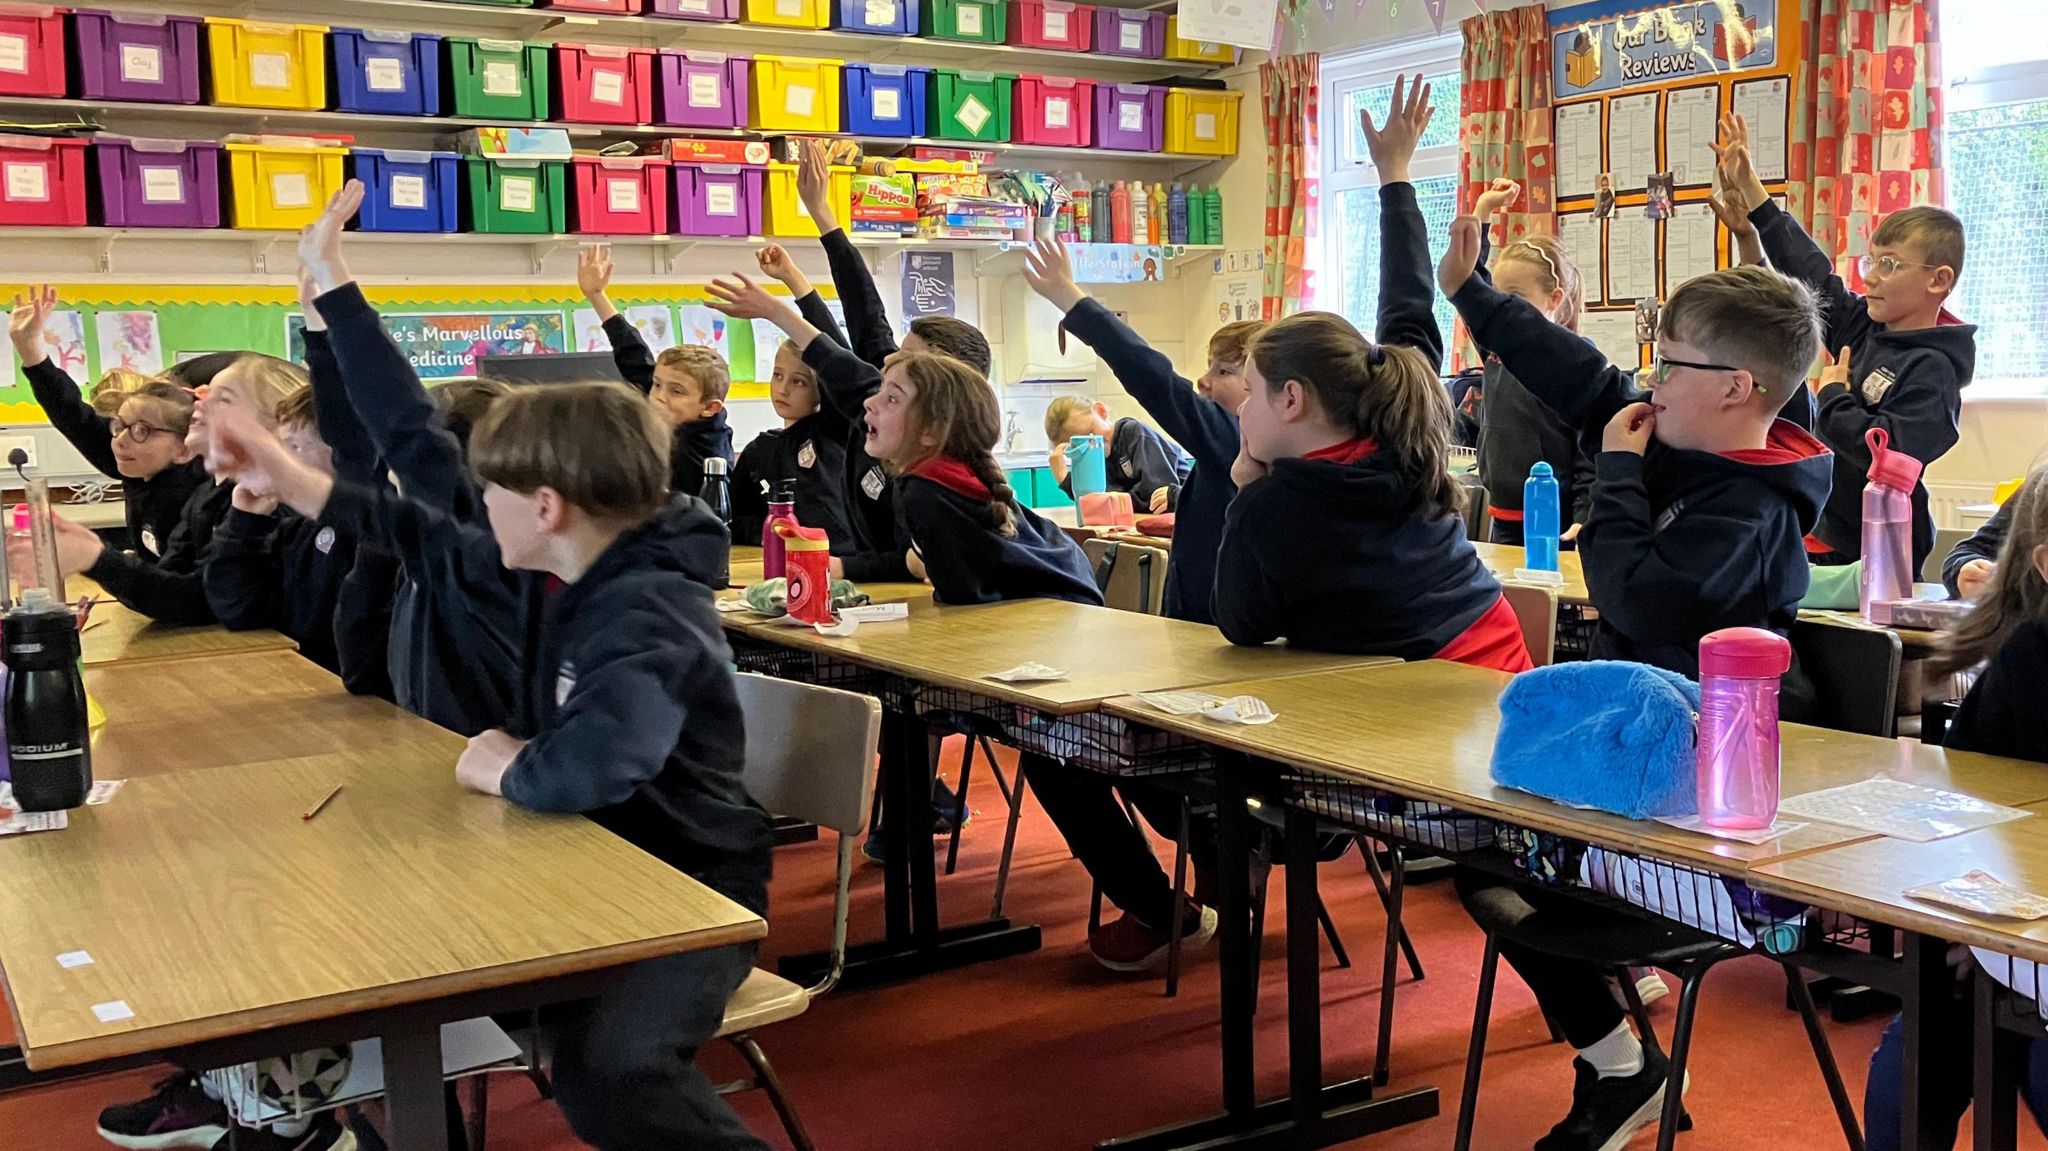 Pupils raising their hands in a classroom